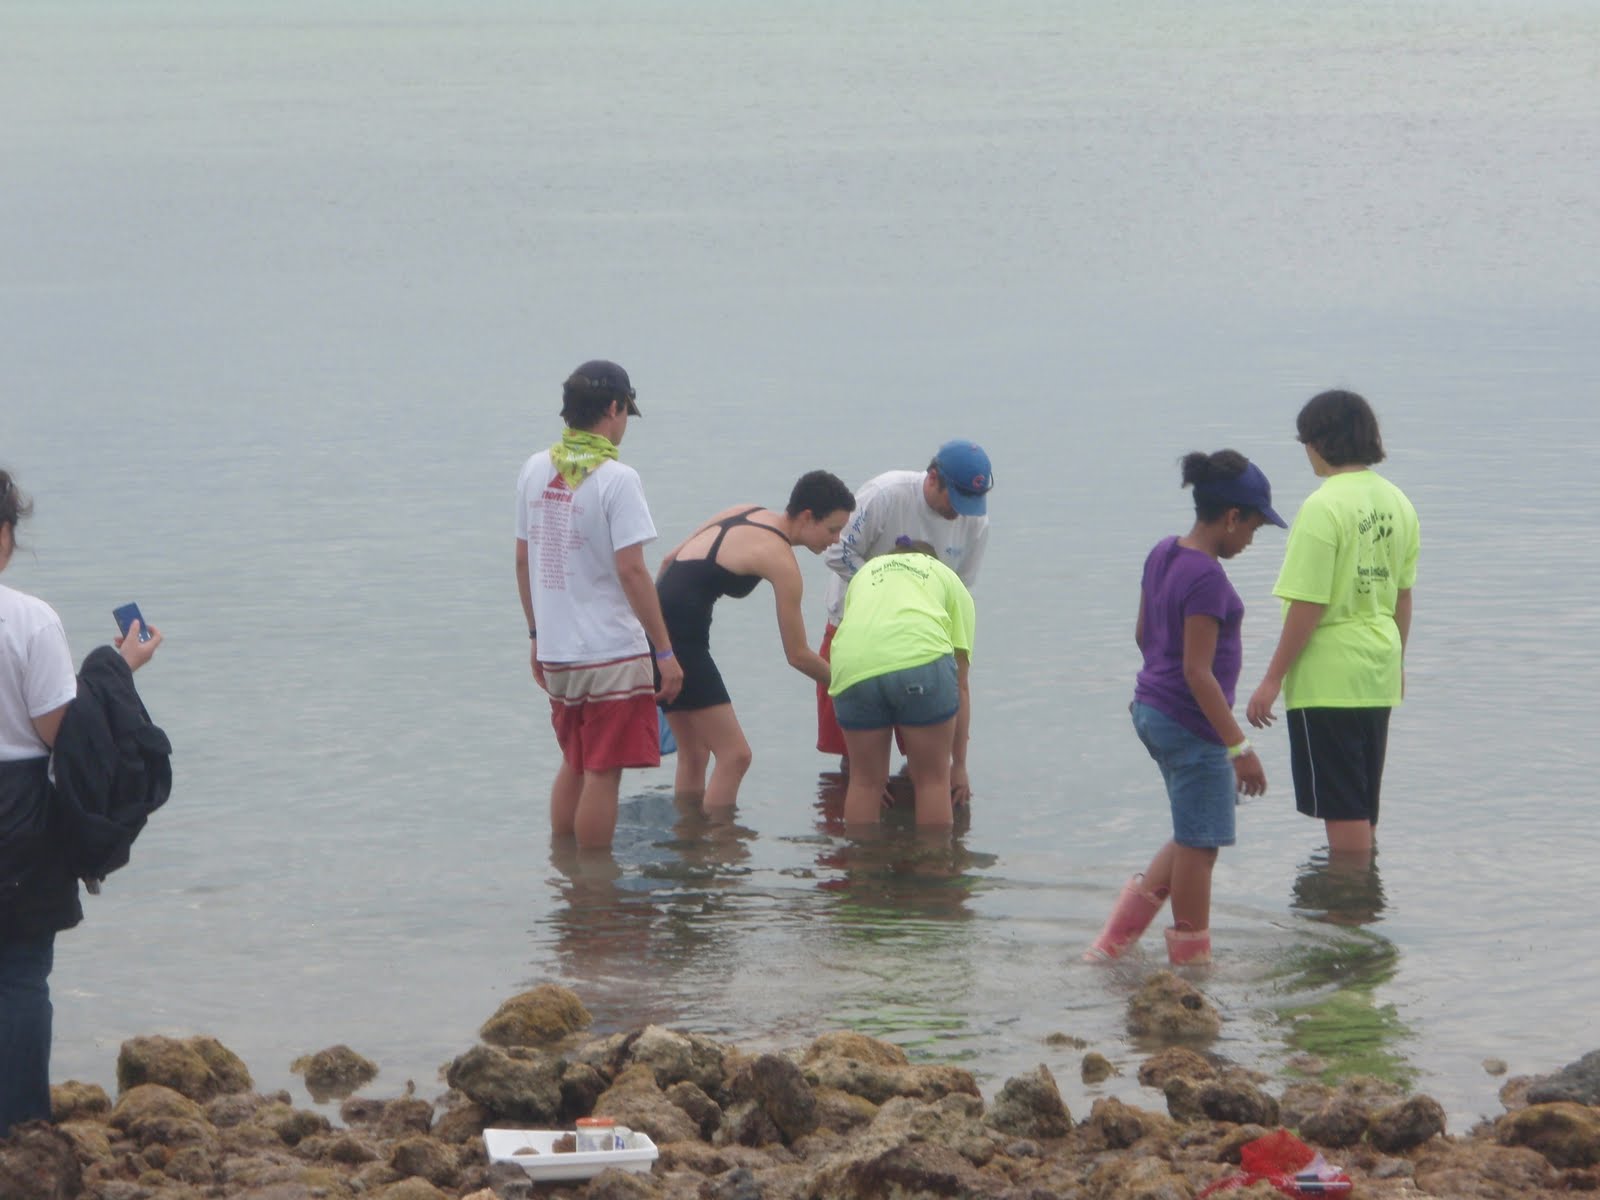 Jenna with group wading in water